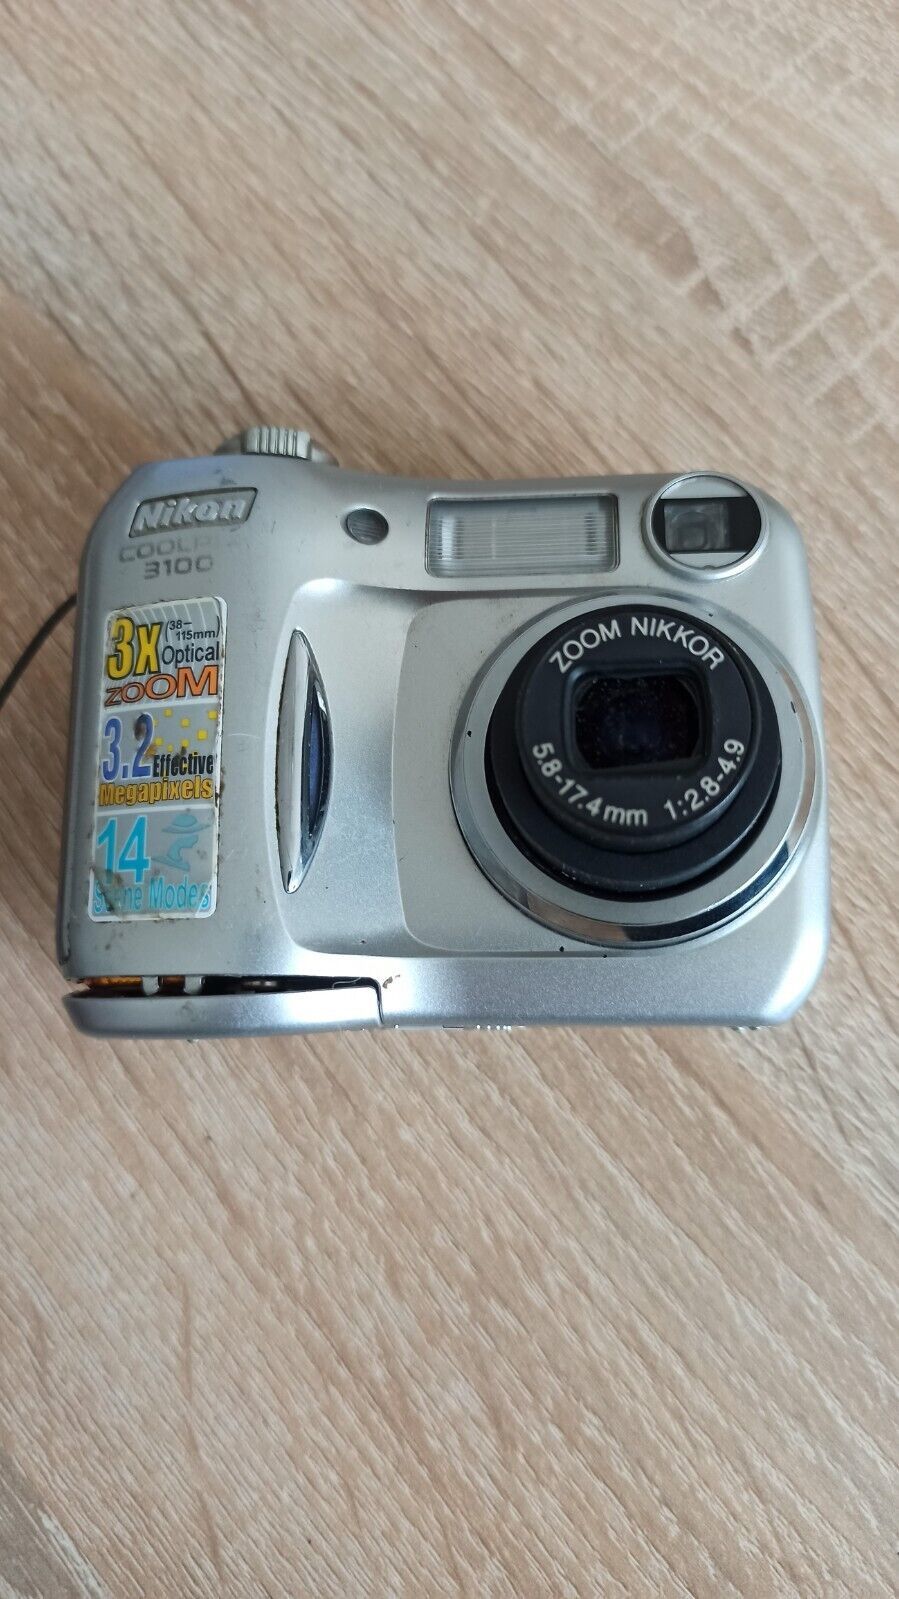 Primary image for Nikon COOLPIX e3100 3.2MP Digital Camera work